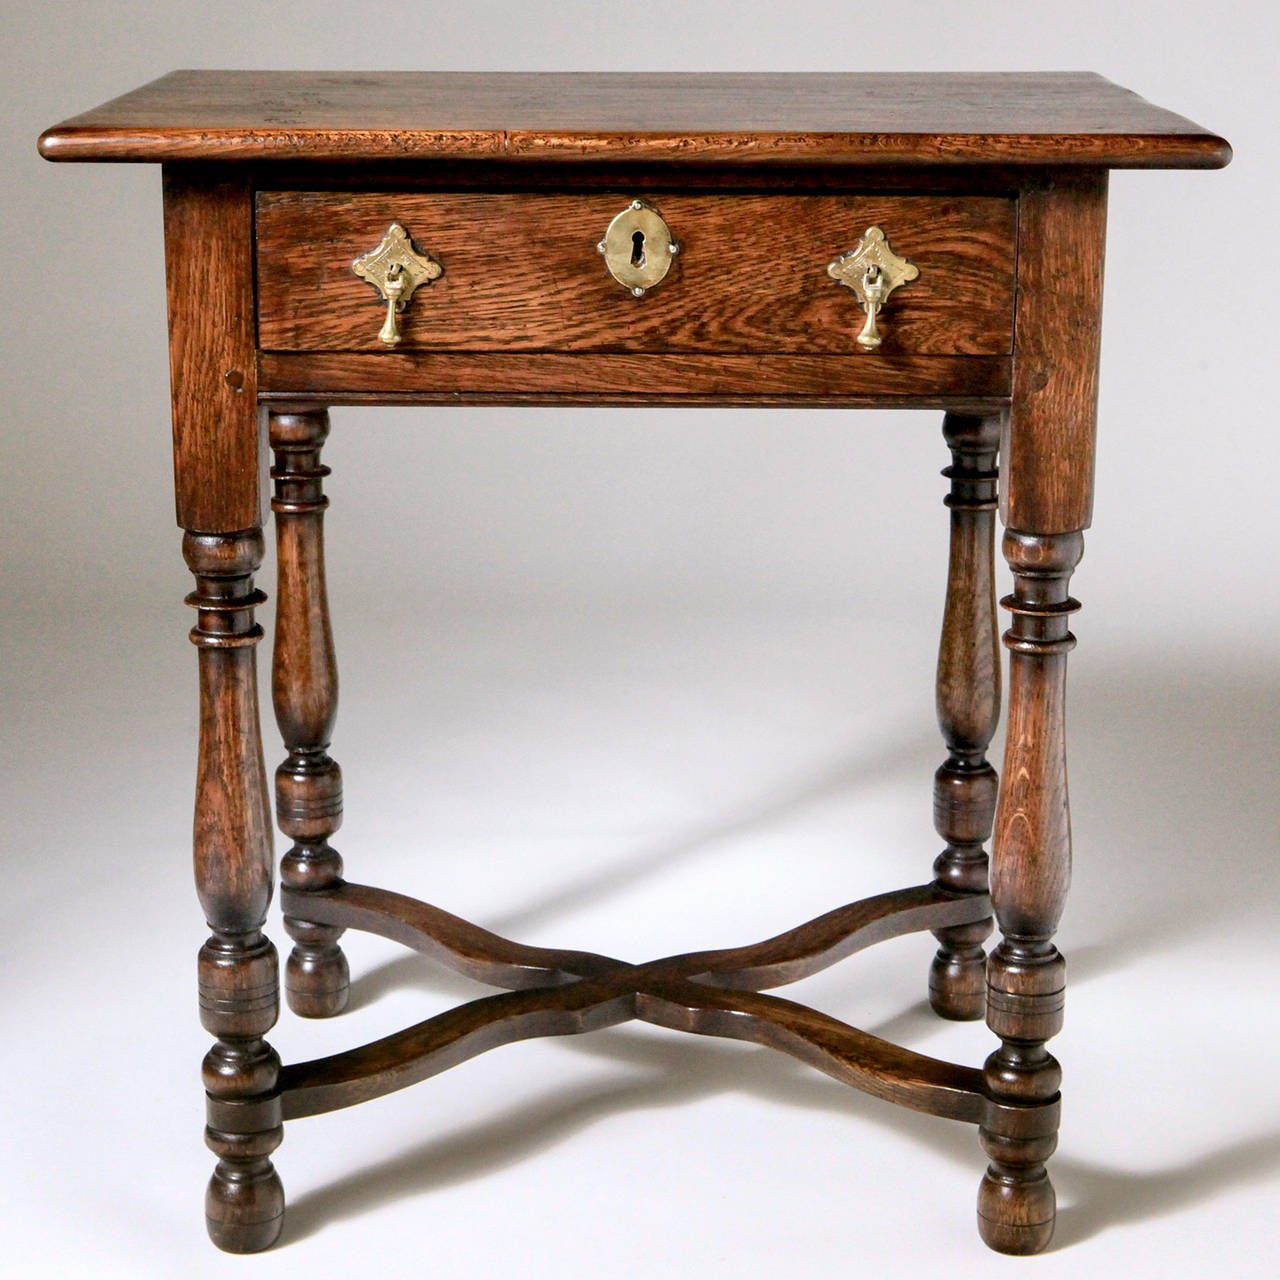 Traditional polished English oak side table with cross stretcher and turned legs. The table features a long drawer with lock and key. This Classic table is handcrafted in English workshops using the finest materials and antique tools to recreate a